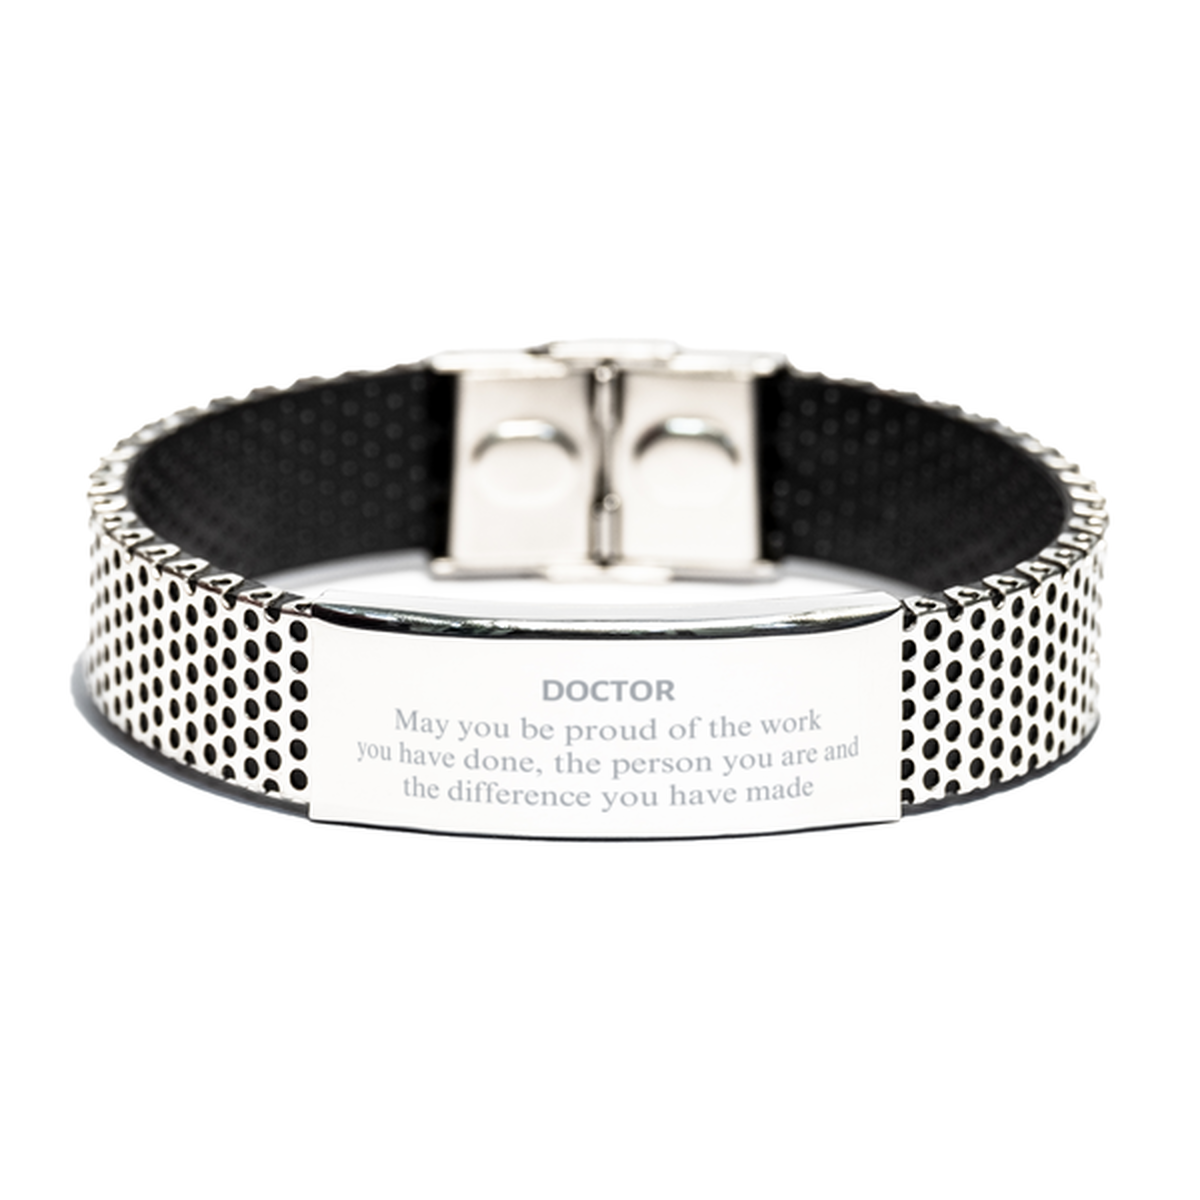 Doctor May you be proud of the work you have done, Retirement Doctor Stainless Steel Bracelet for Colleague Appreciation Gifts Amazing for Doctor